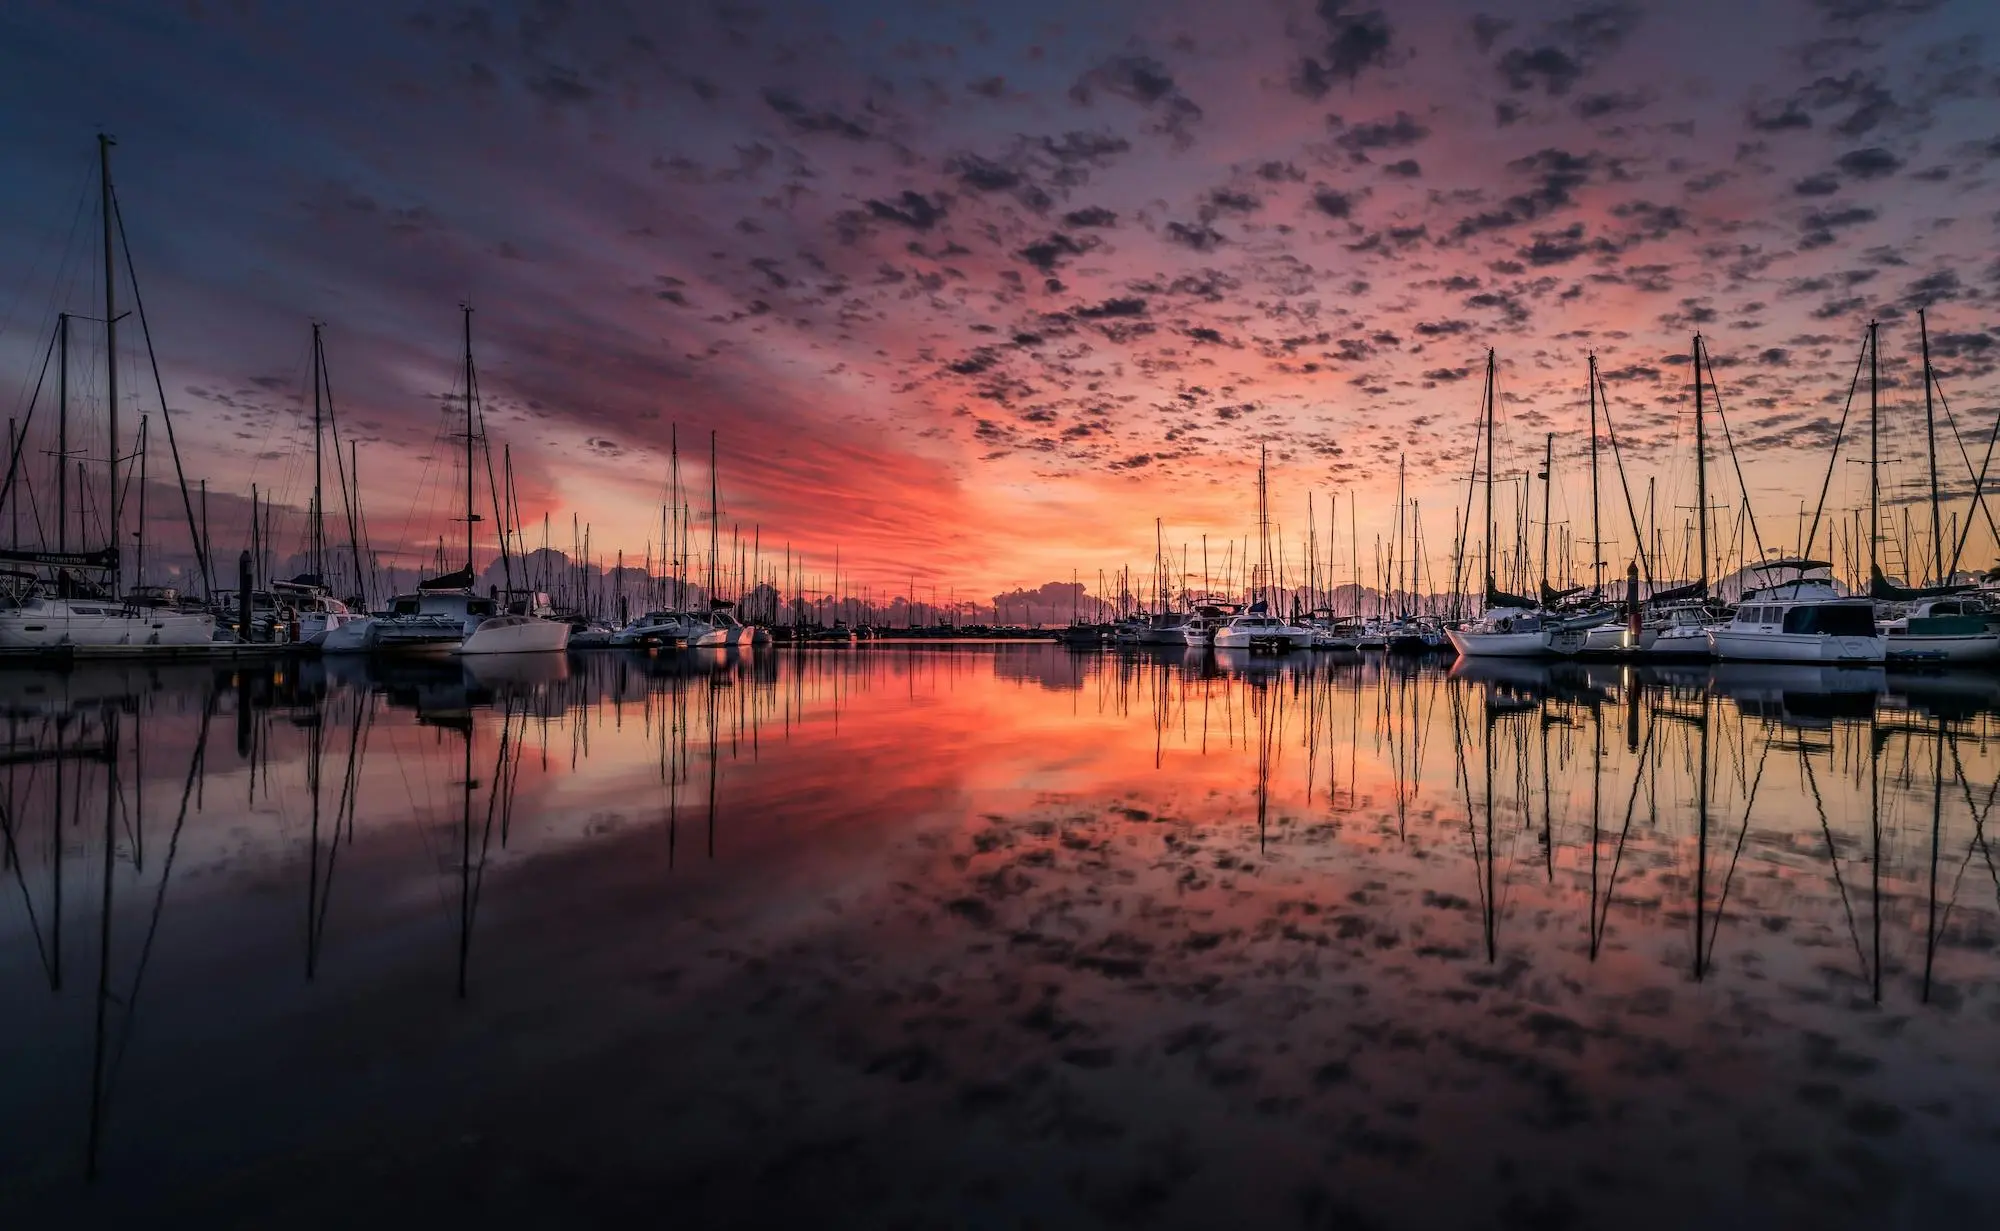 A harbor full of boats with a pink sunset casting its light on everything